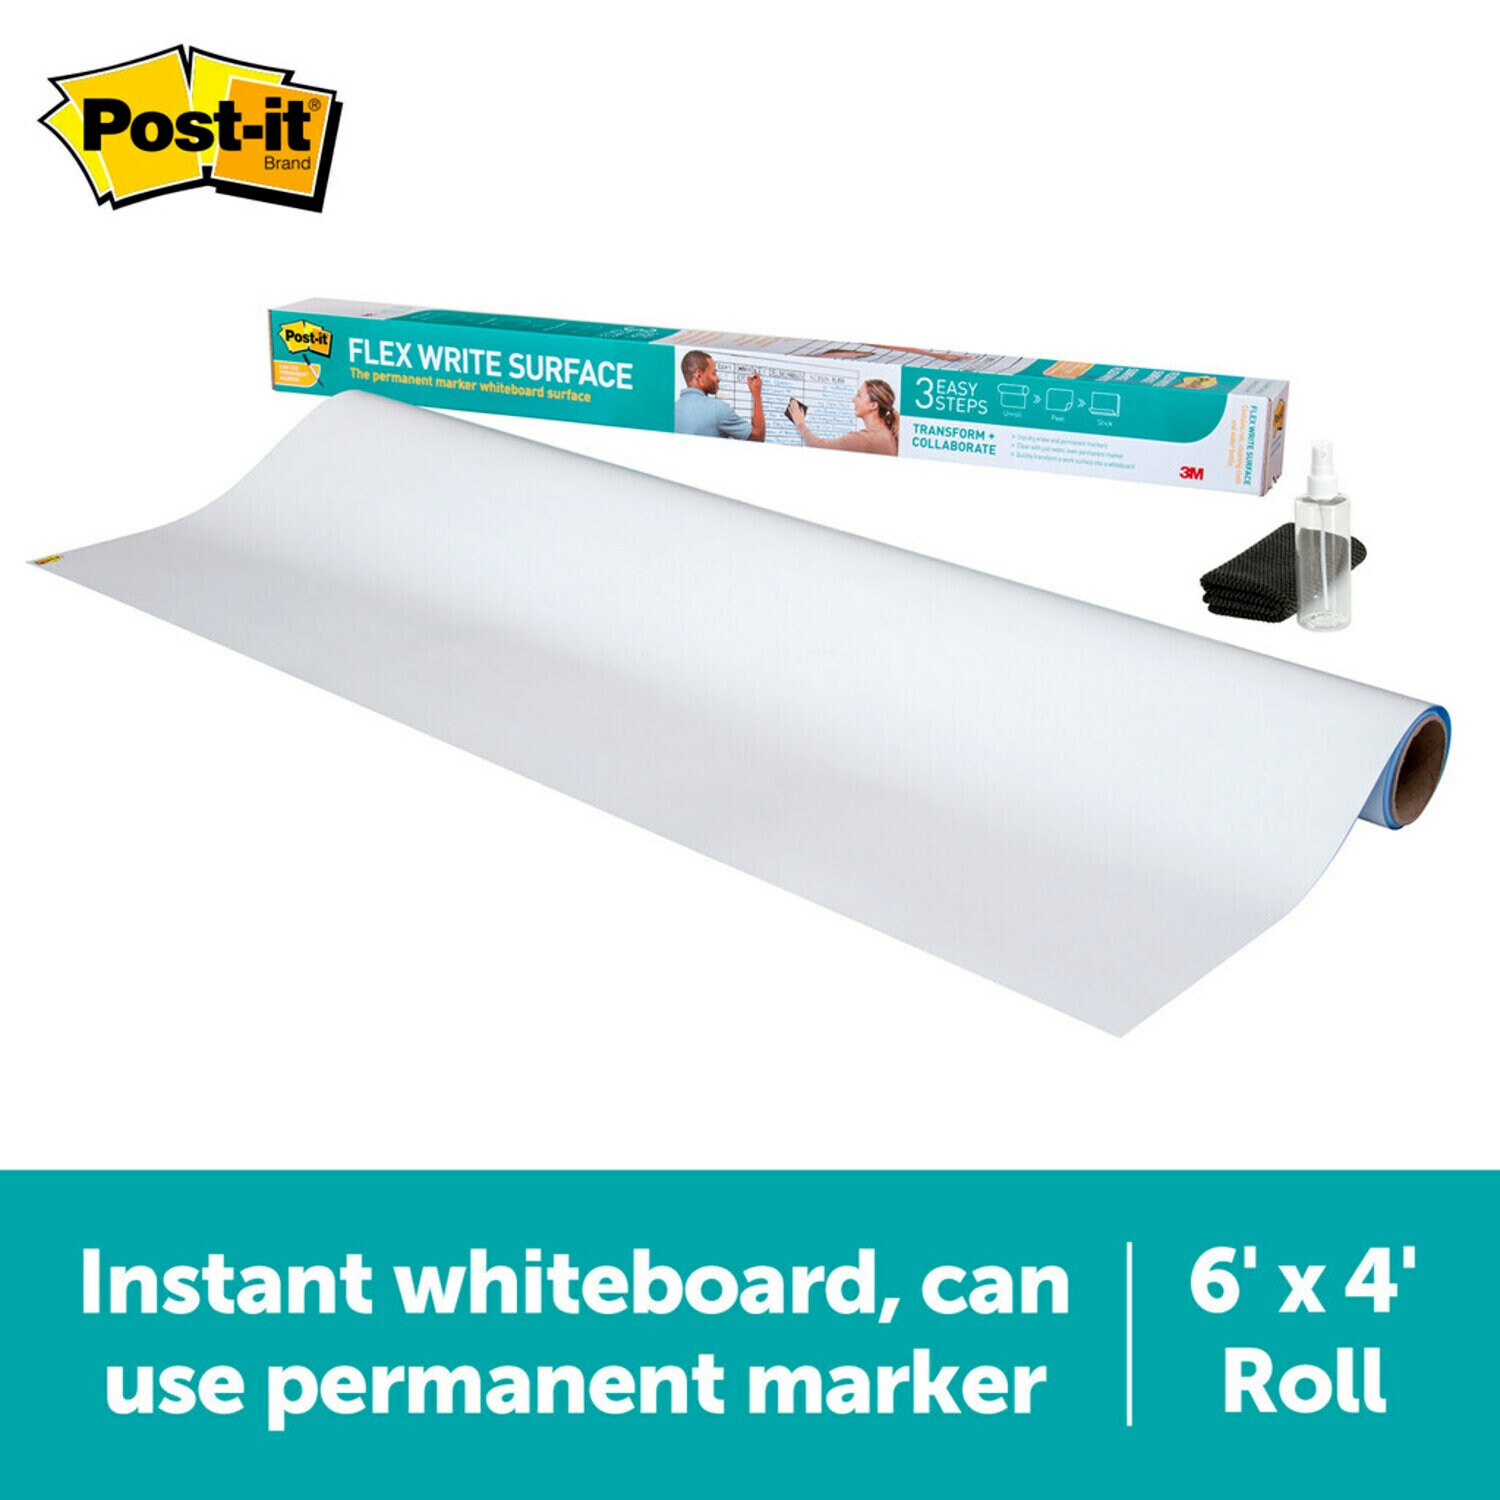 7100198315 - Post-it Flex Write Surface, The Permanent Marker Whiteboard Surface, 6 ft. x 4 ft.